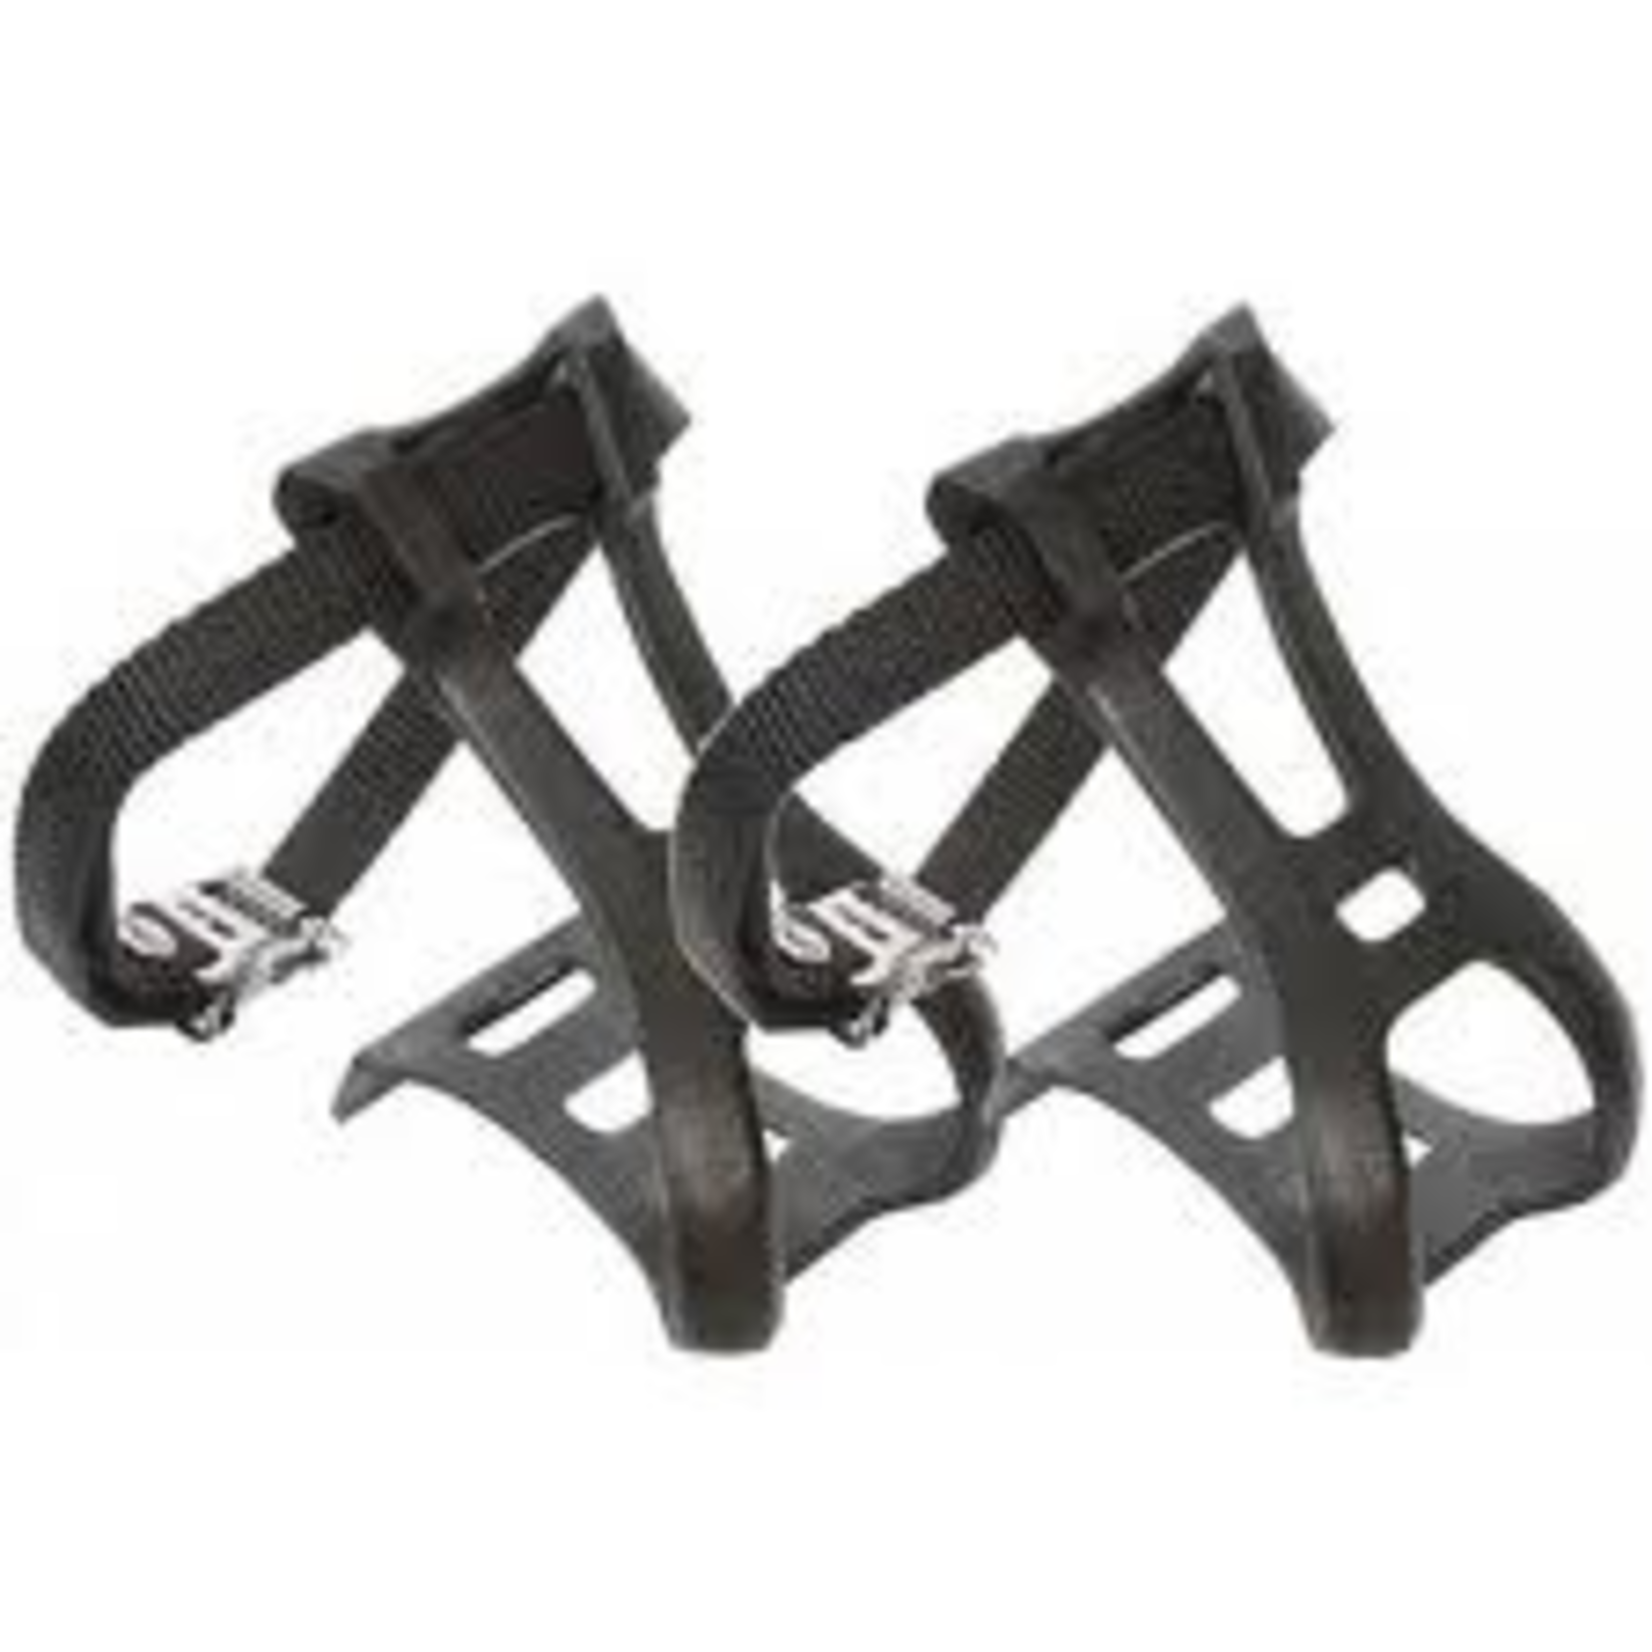 49 N Toe Clips & Straps - Large